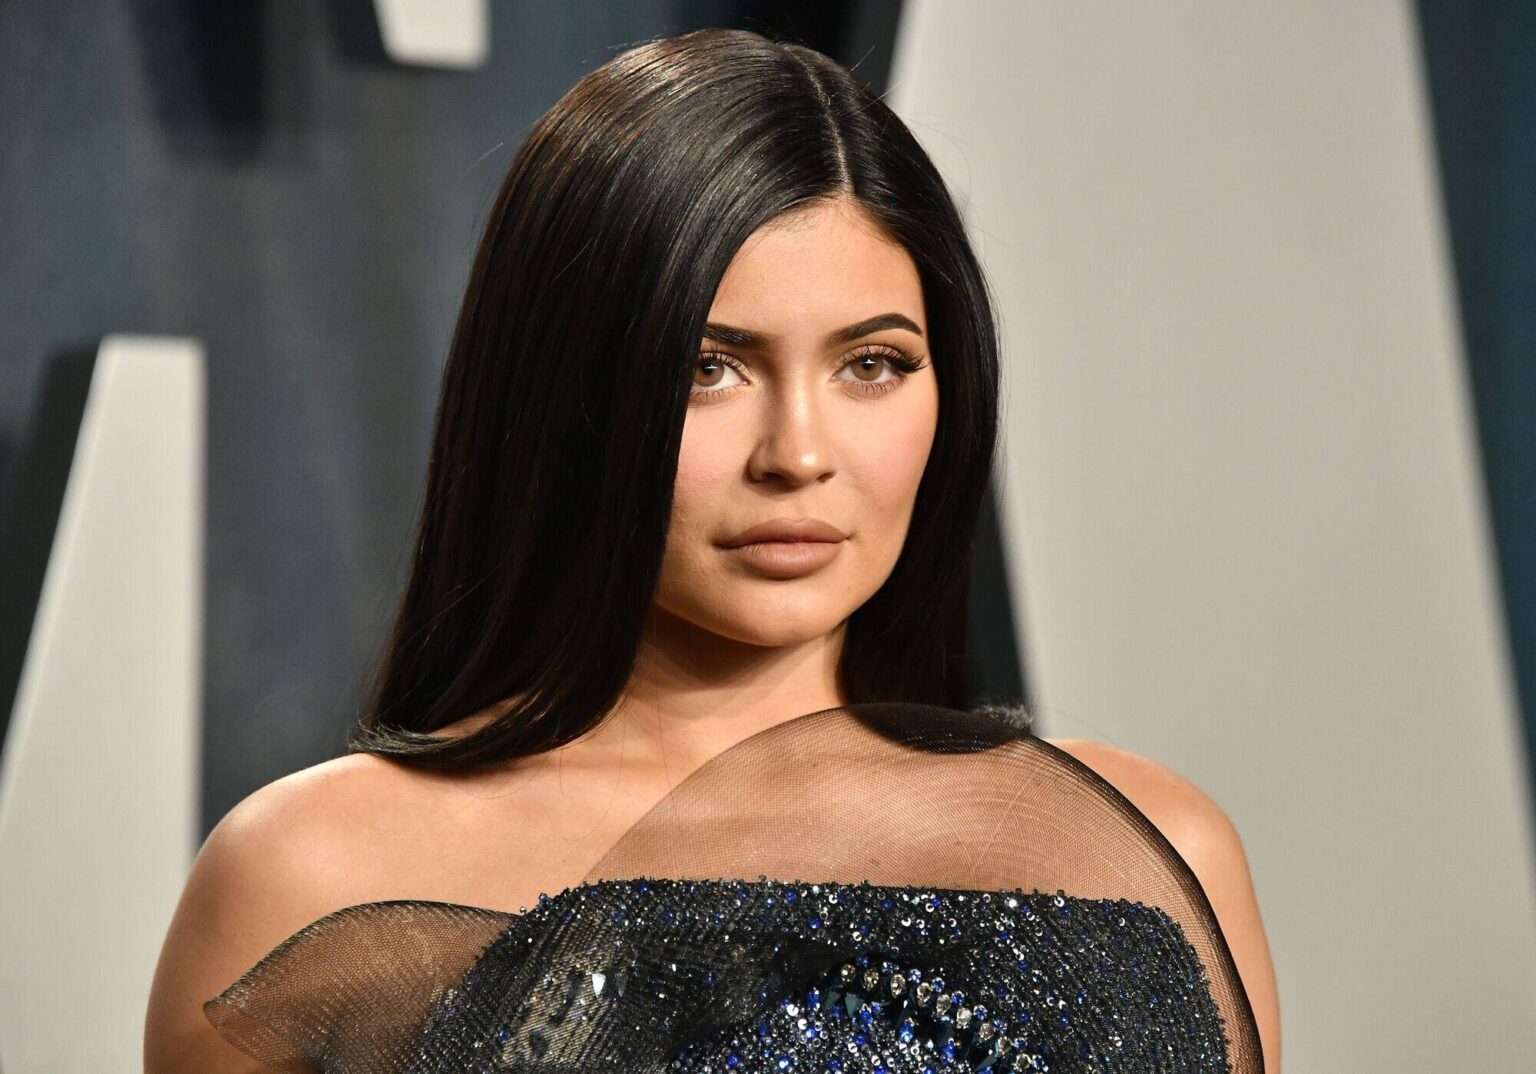 Has Kylie Jenner run out of money? Or is the reality star just super cheap? The billionaire has disappointed her fans again! Here's everything we know.